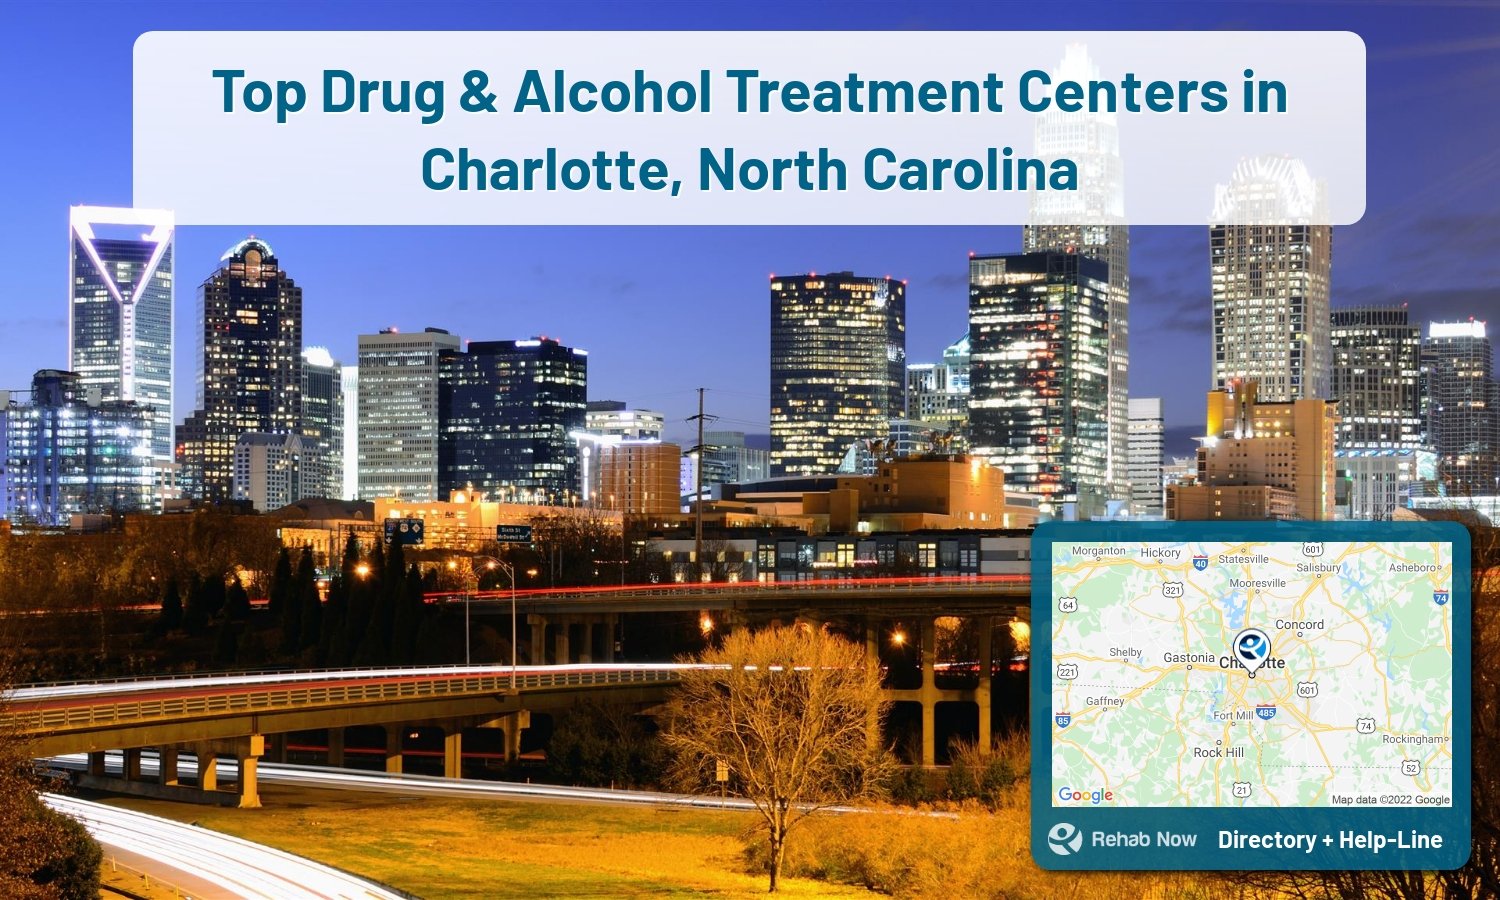 Ready to pick a rehab center in Charlotte? Get off alcohol, opiates, and other drugs, by selecting top drug rehab centers in North Carolina